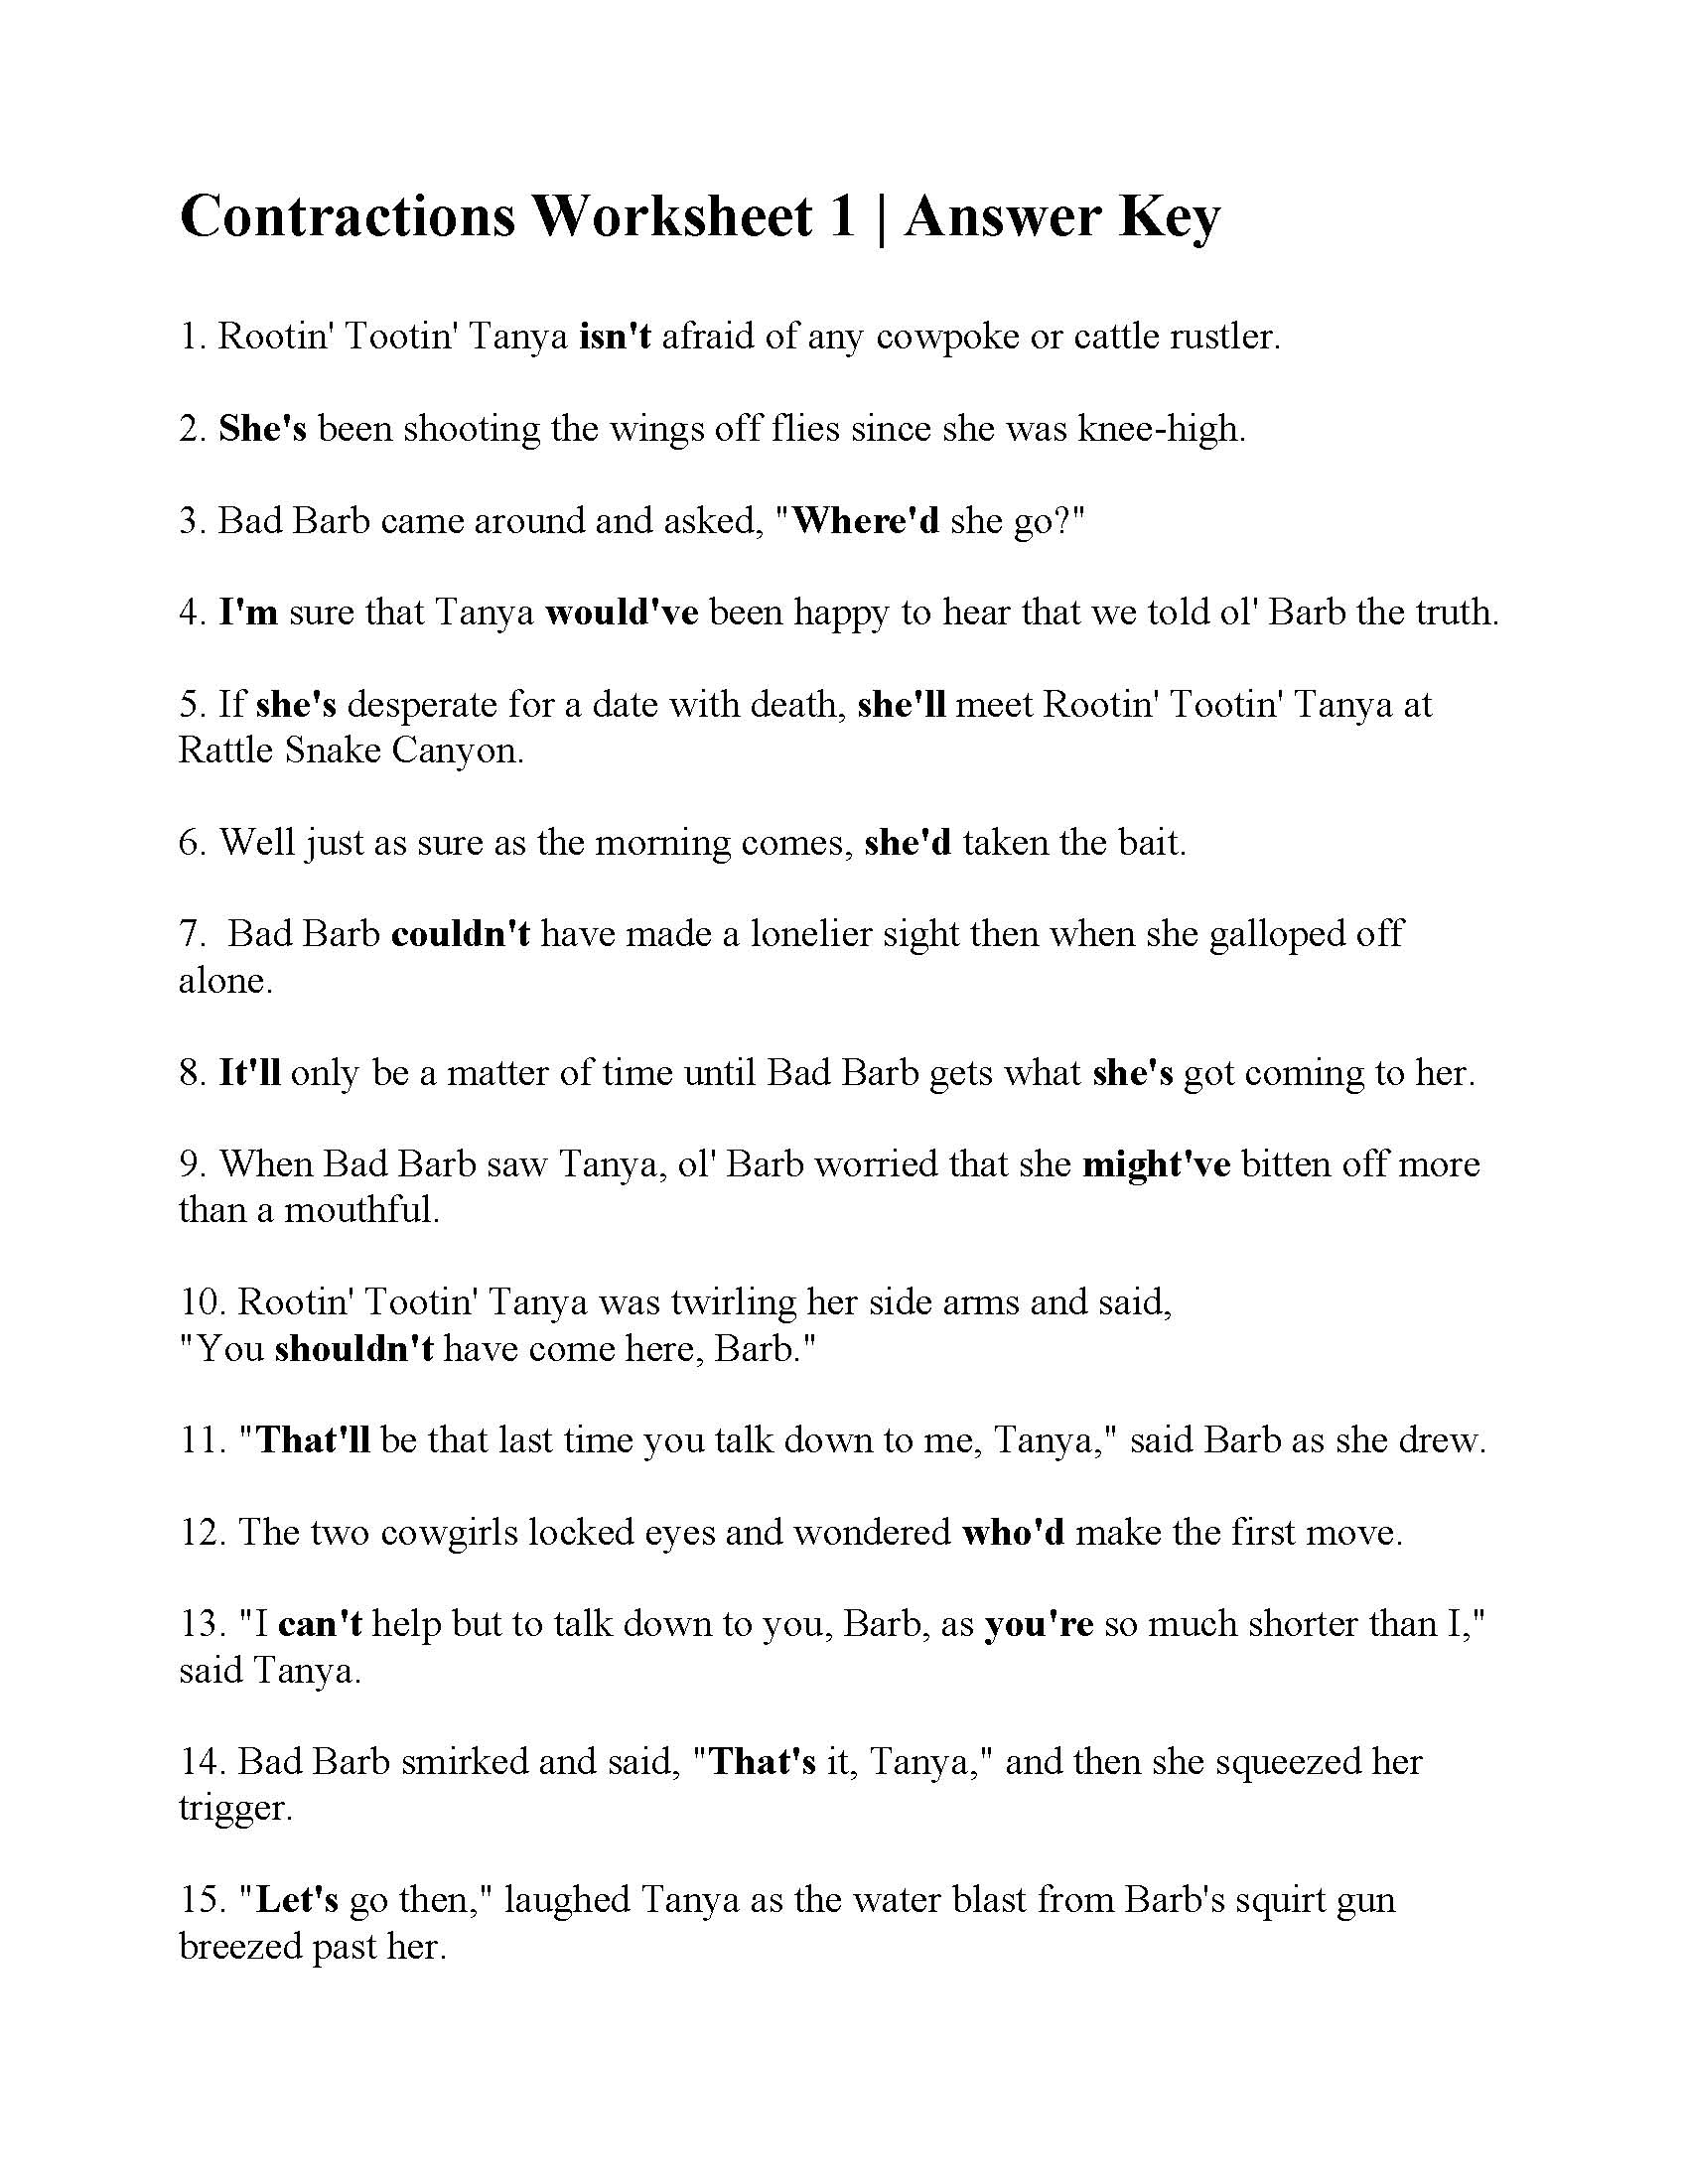 This is a preview image of Contractions Worksheet 1. Click on it to enlarge it or view the source file.